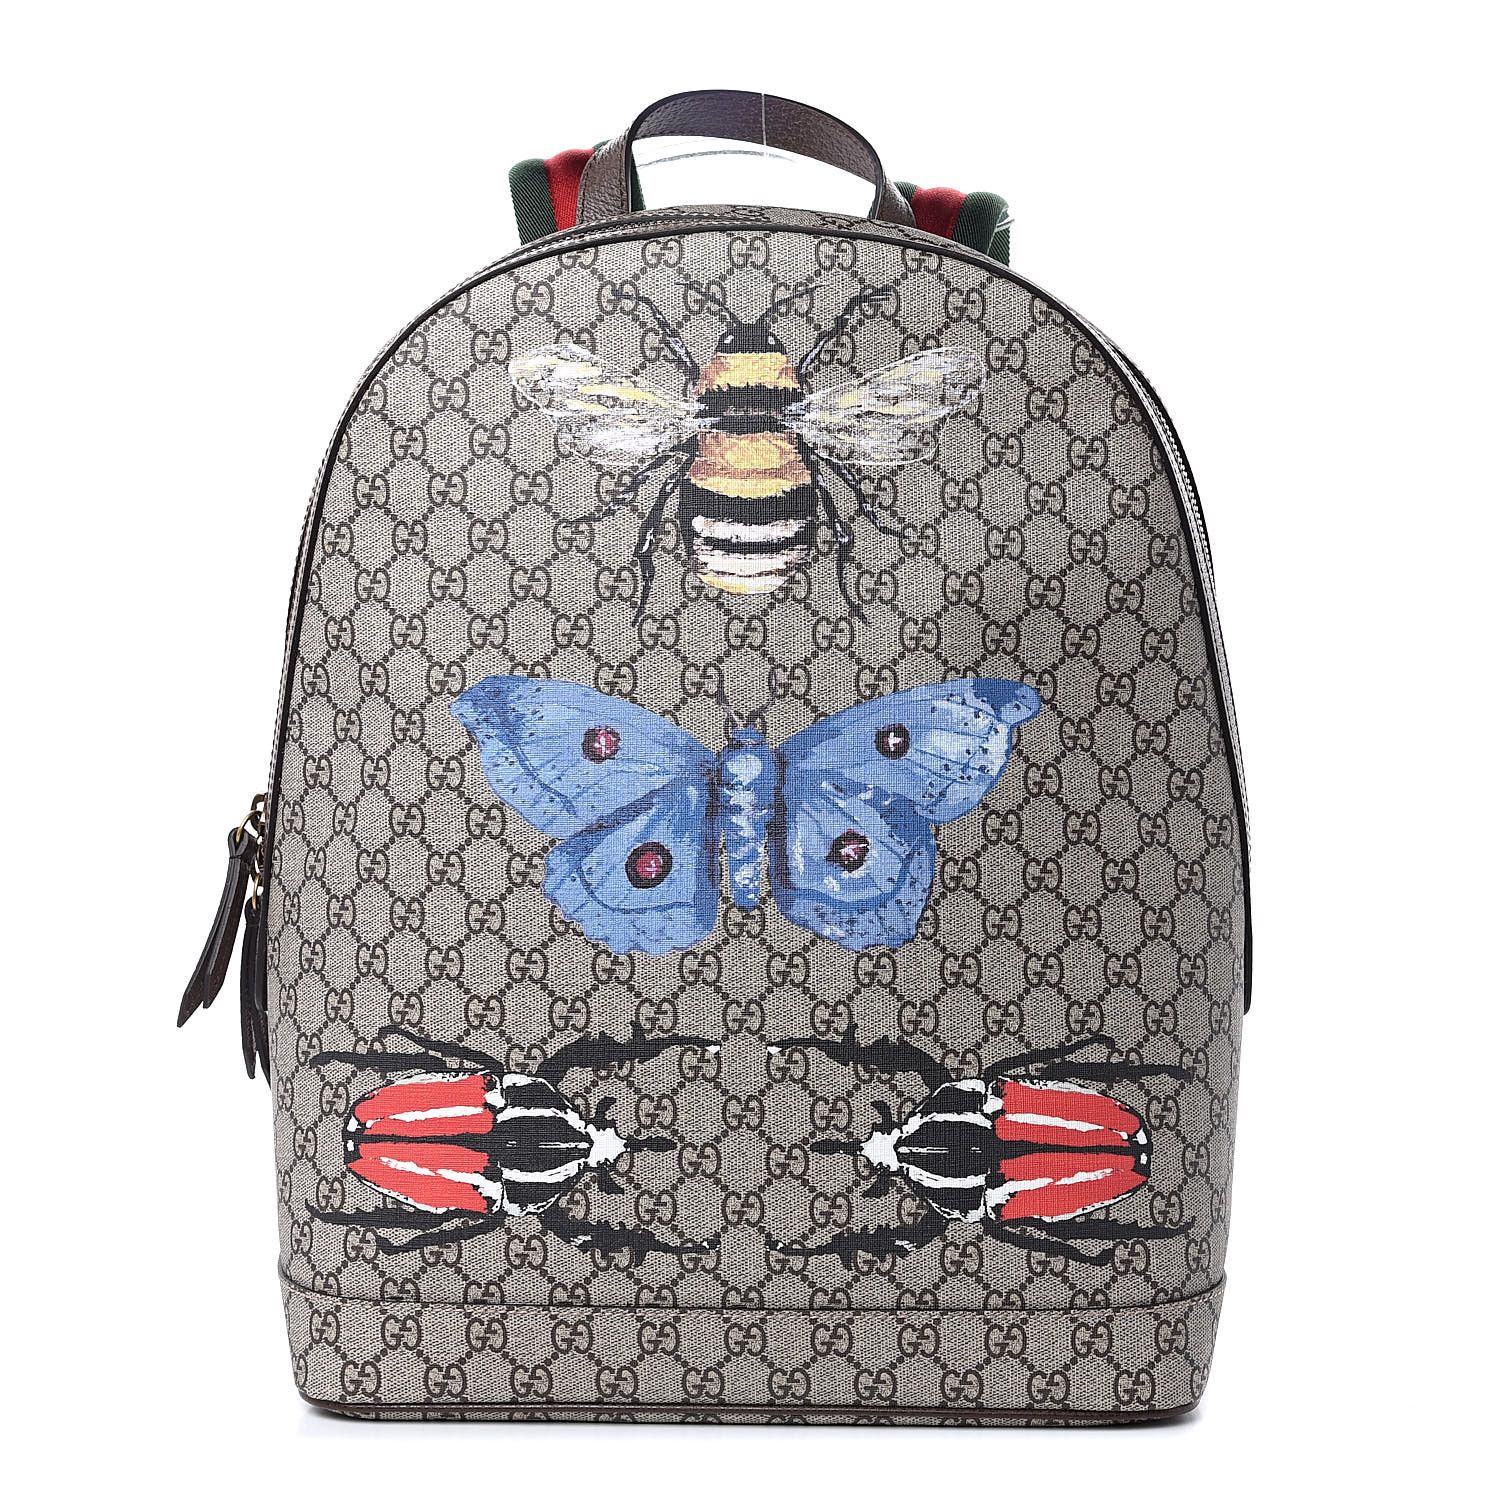 gucci insect backpack